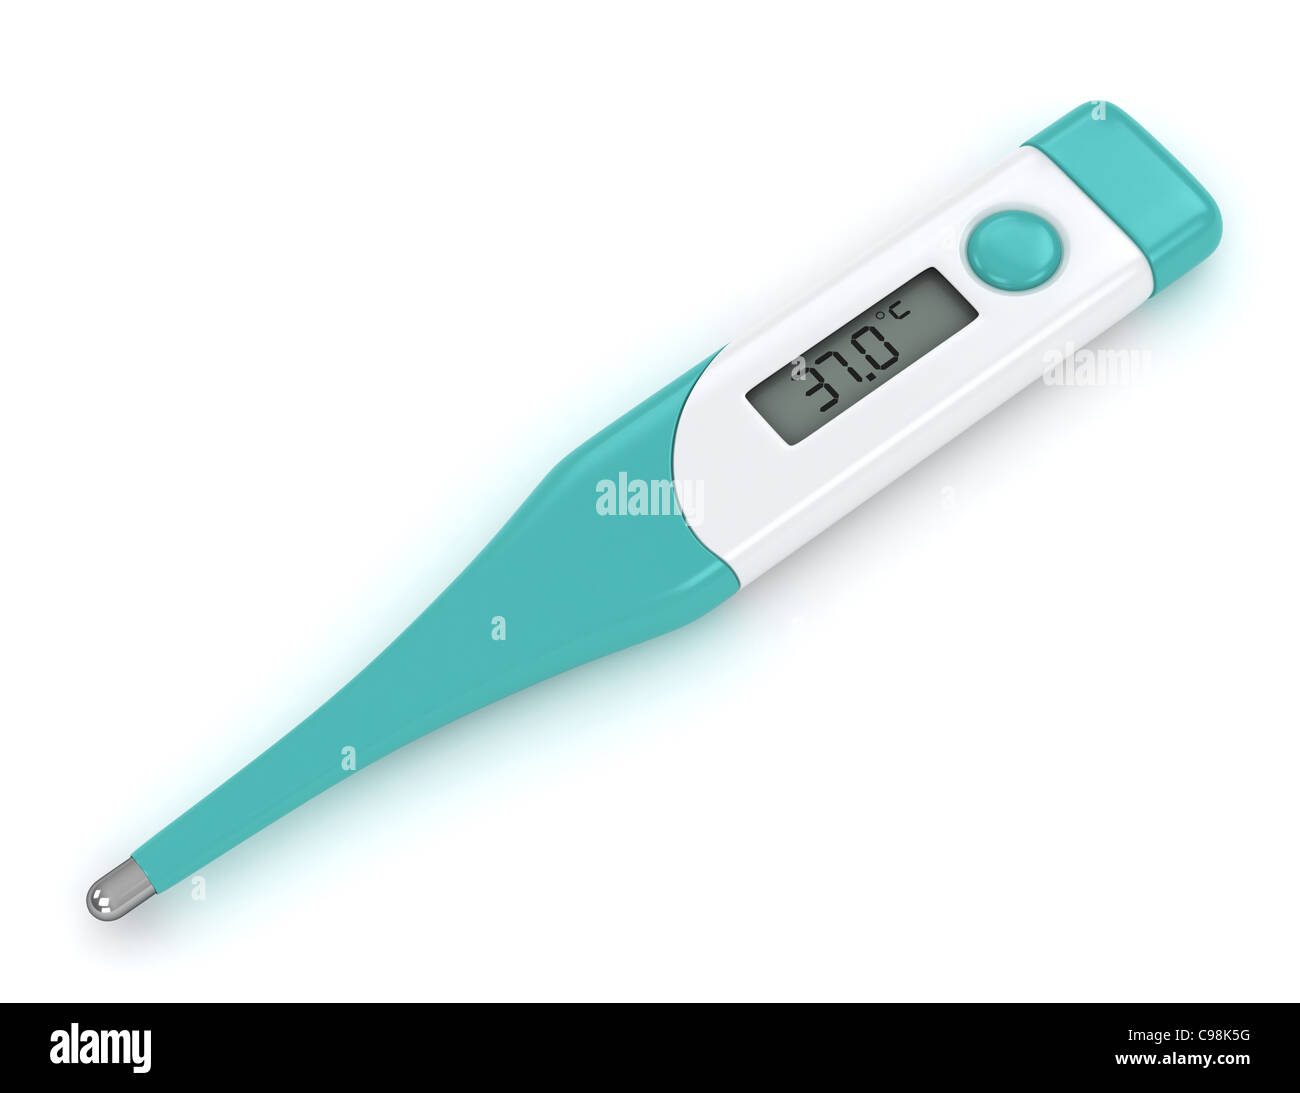 3D Illustration of a Digital Thermometer Stock Photo